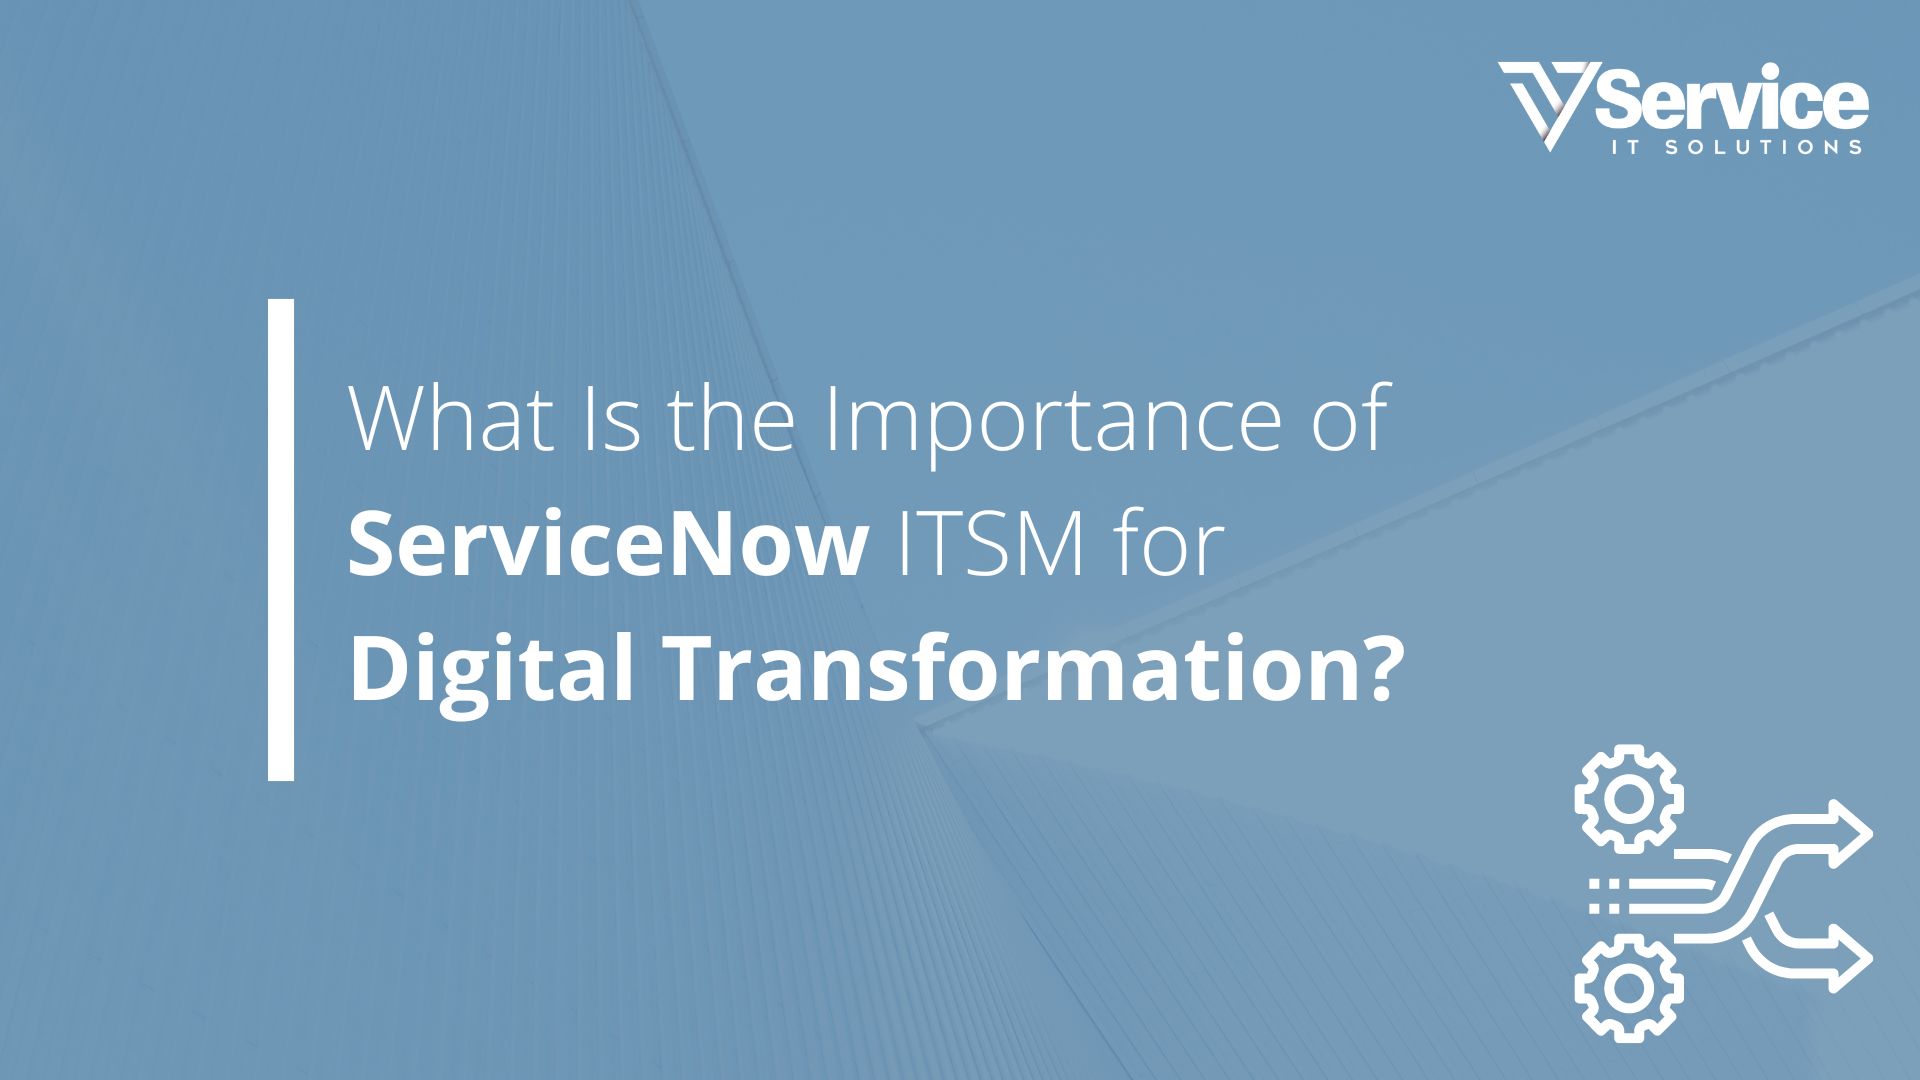 What Is the Importance of ServiceNow ITSM for Digital Transformation